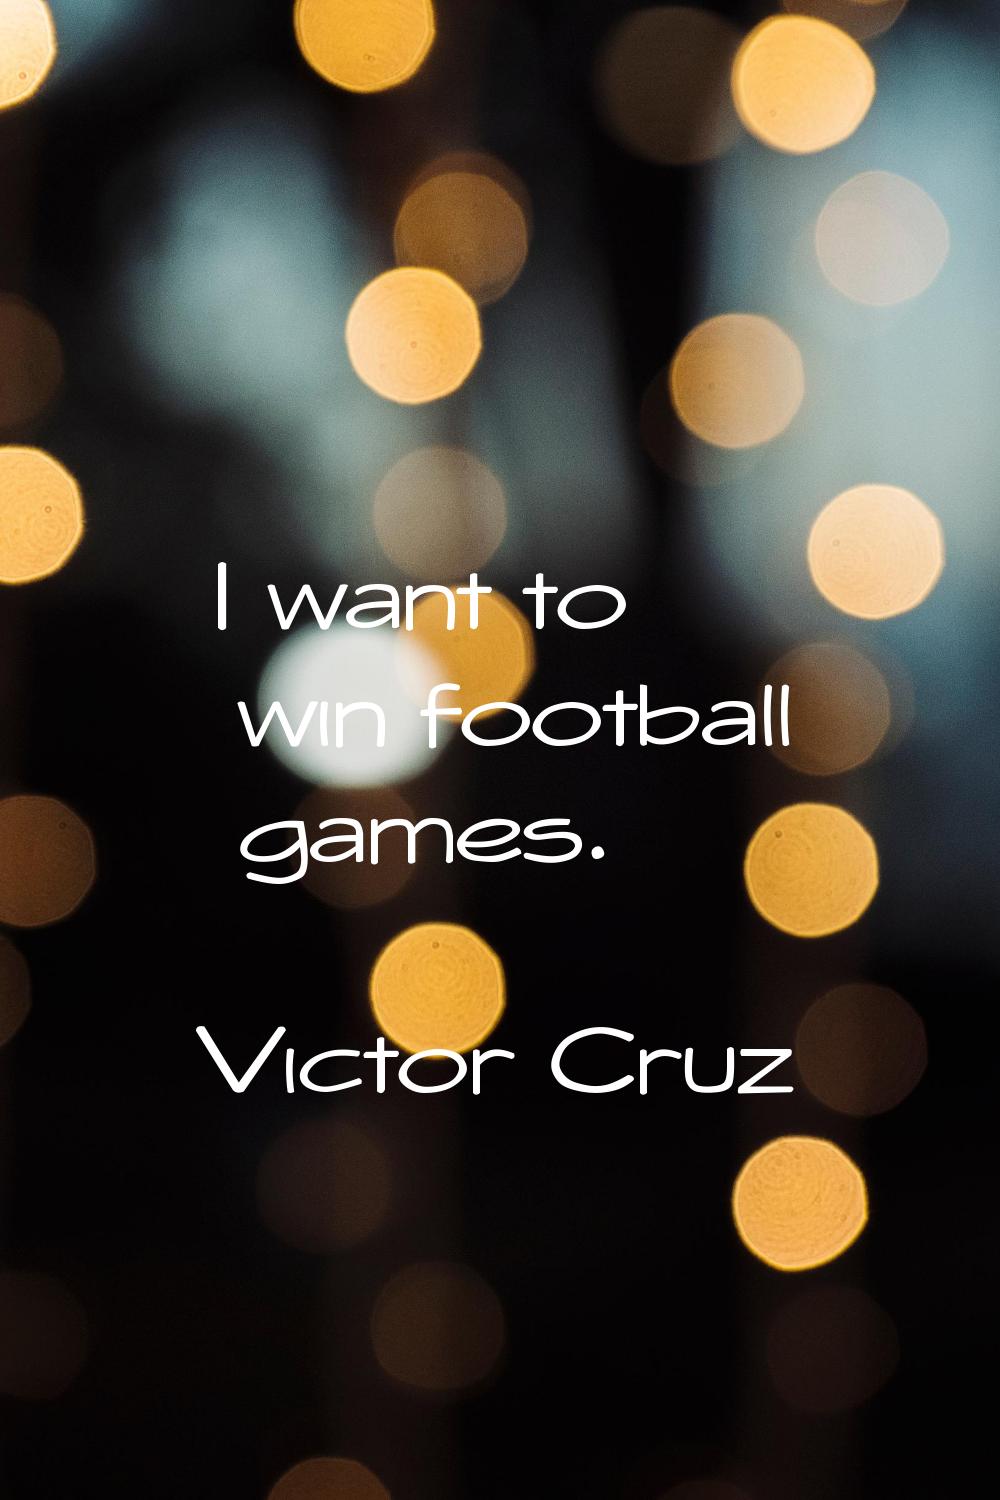 I want to win football games.